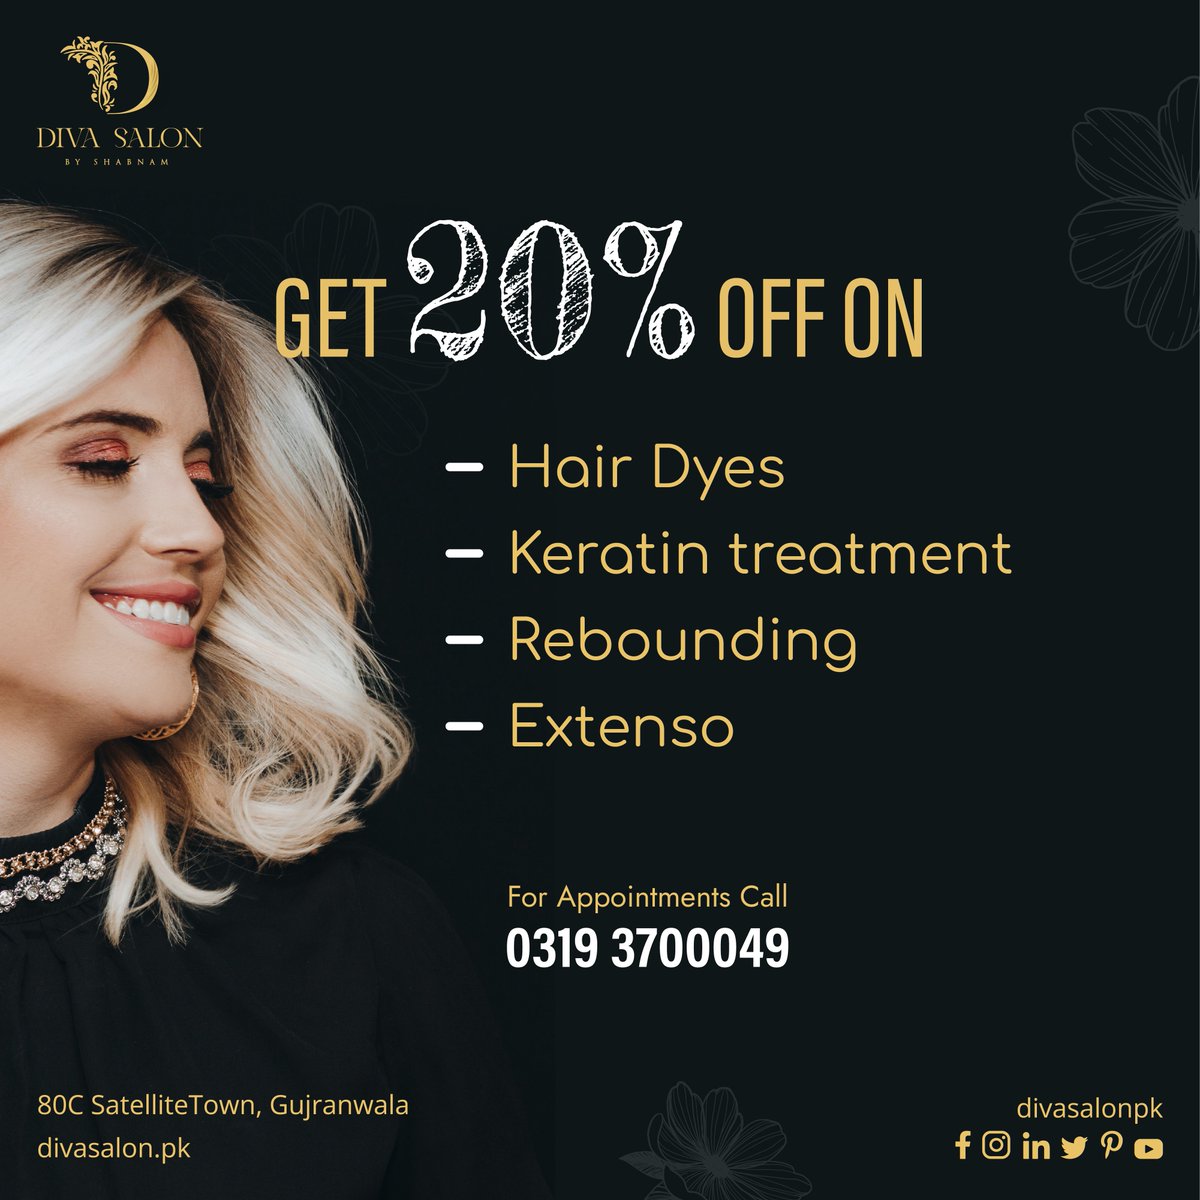 🚧⚠️Don’t Miss out. ⚠️🚧
Save 20% with this unbeatable offer!

#divasalonpk #beautyservices #satellitetown #gujranwala
.
.
.

#hairdye #haircare #kertintreatment #rebounding #extenso #appointment #beautyshop #beautyinnature #beautystudio #beautycreations  #beautyday #salons